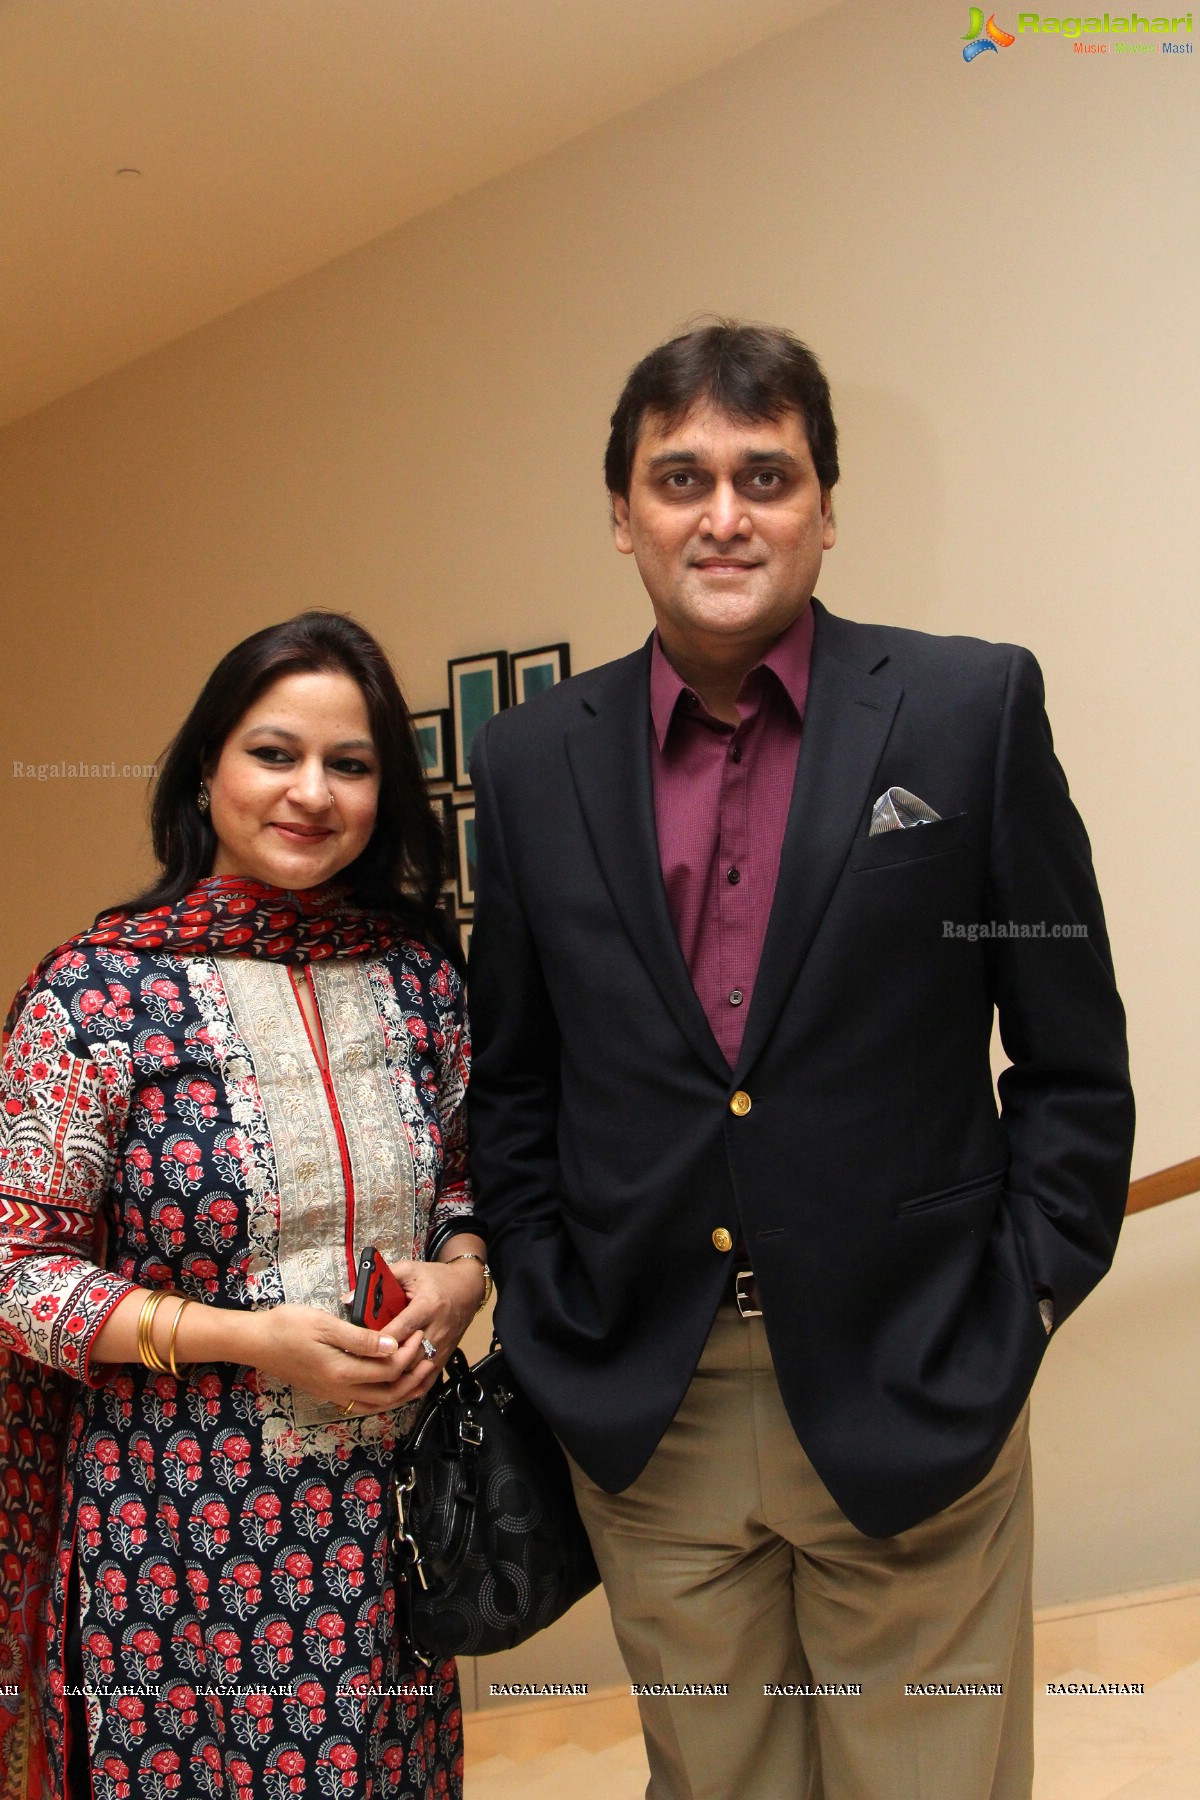 India Shastra: Reflections on the Nation in our Time - Shashi Tharoor's Book Launch